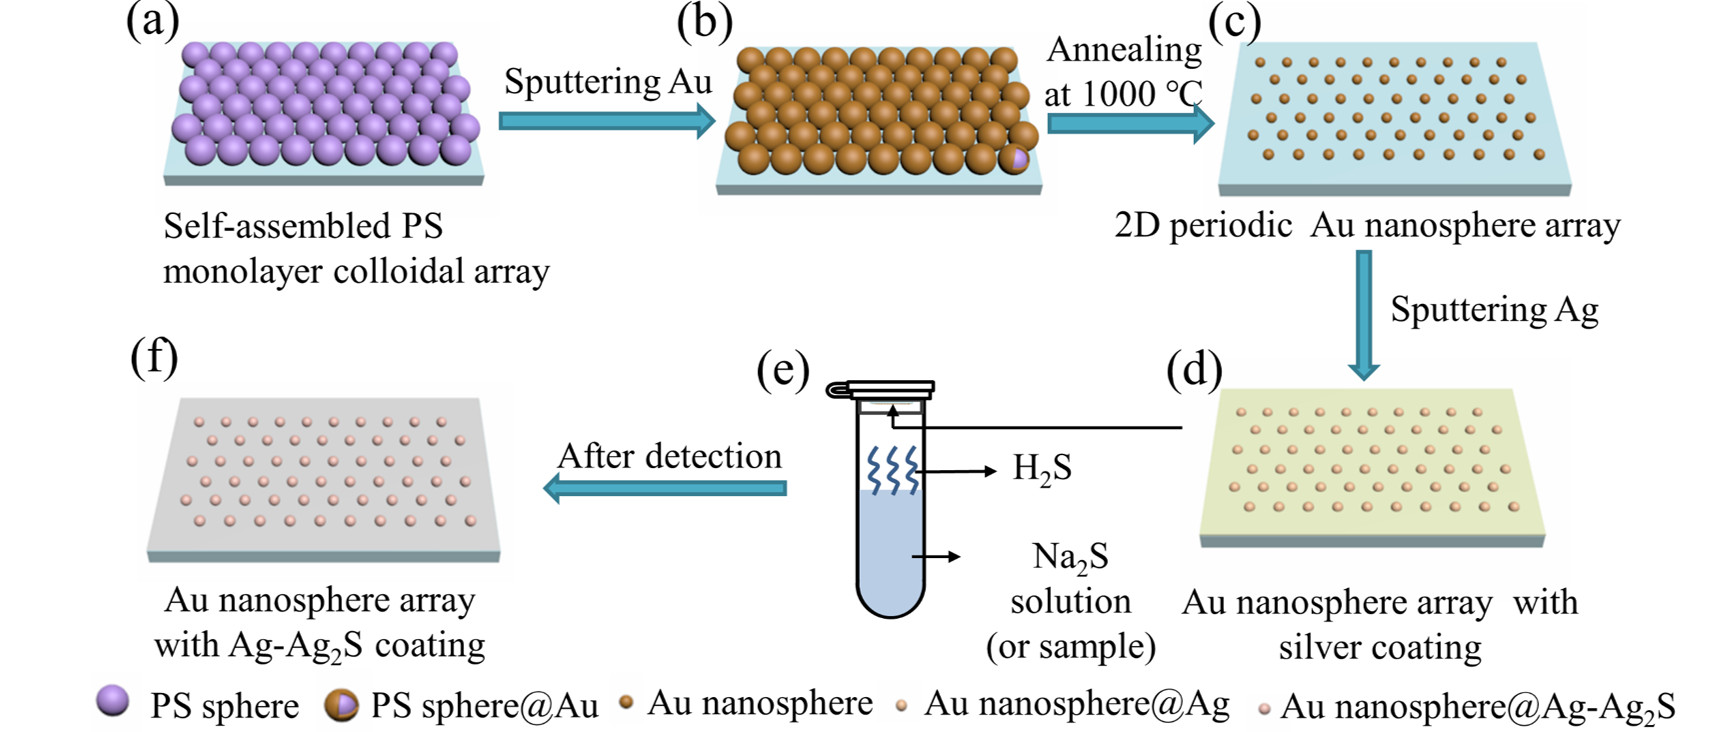 Schematic diagram of fabrication of Au nanosphere arrays with silver coating and their H2S detection.jpg